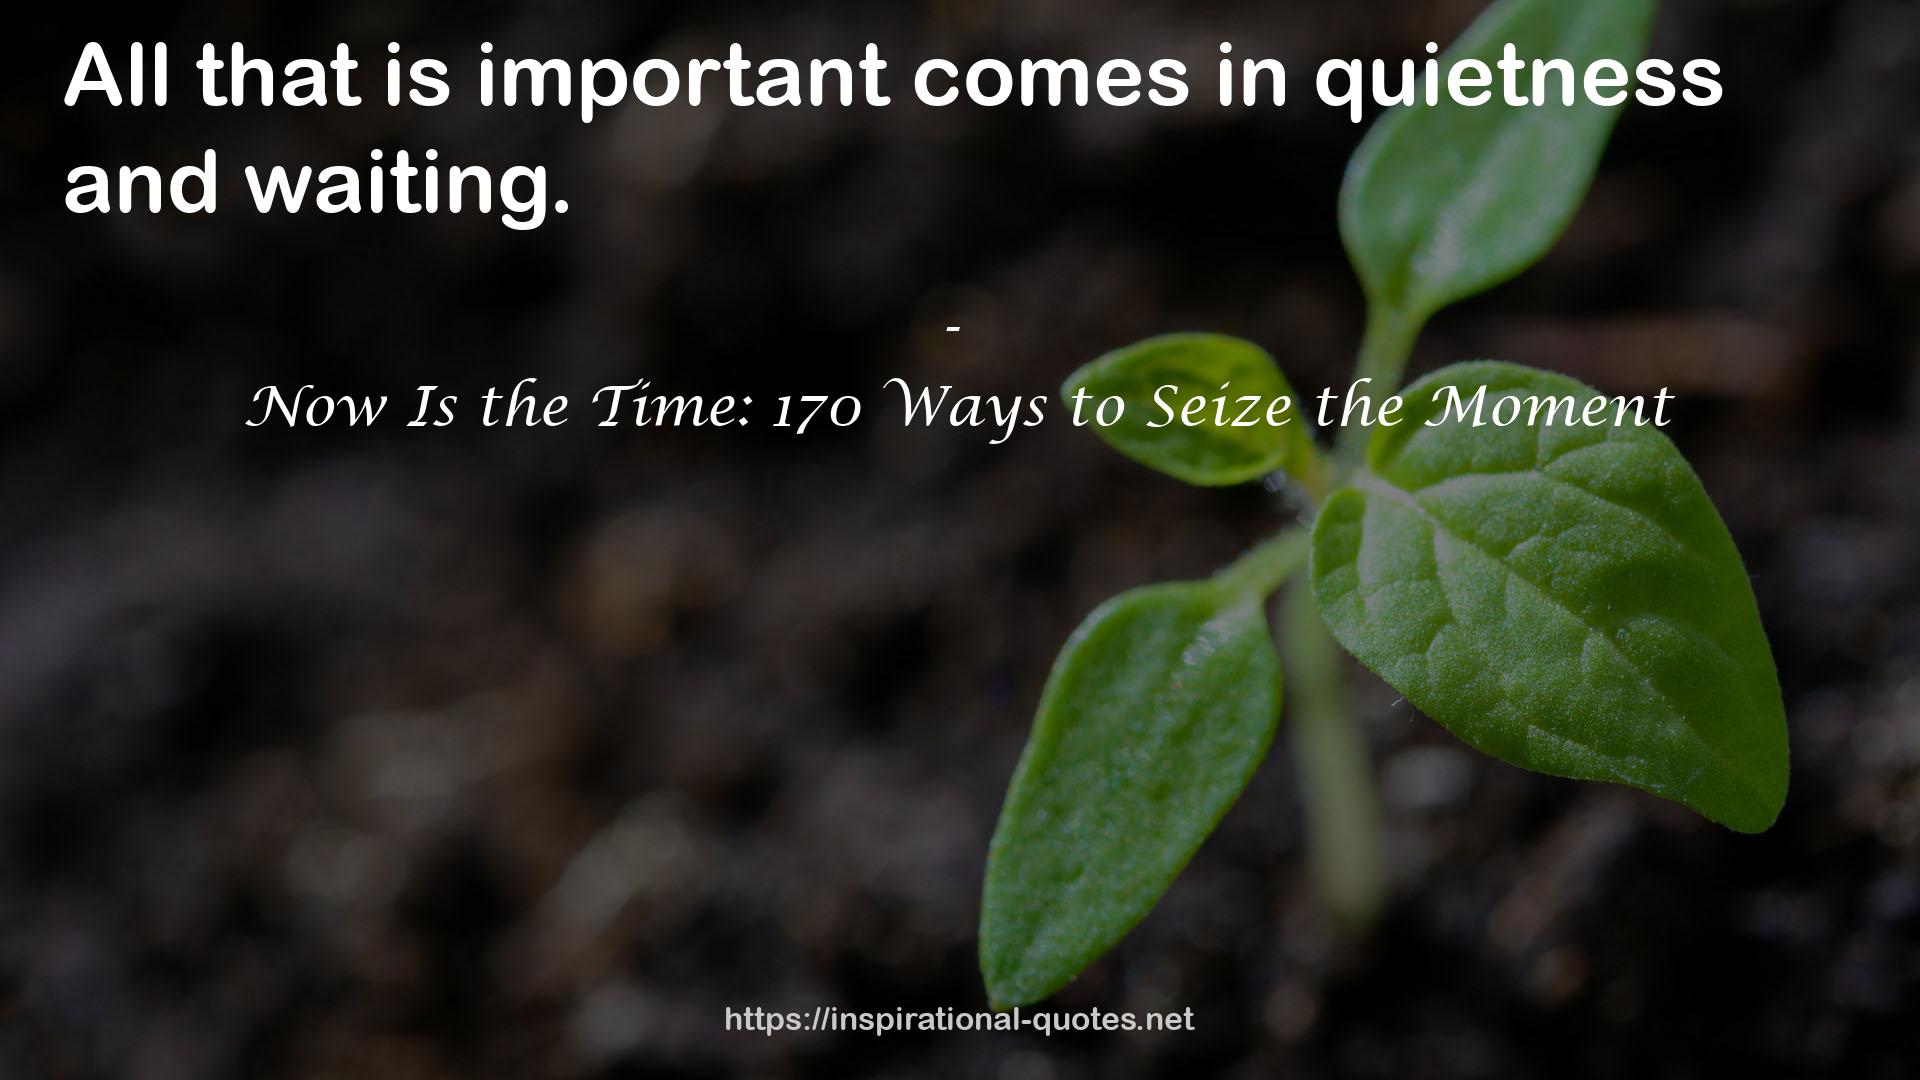 Now Is the Time: 170 Ways to Seize the Moment QUOTES